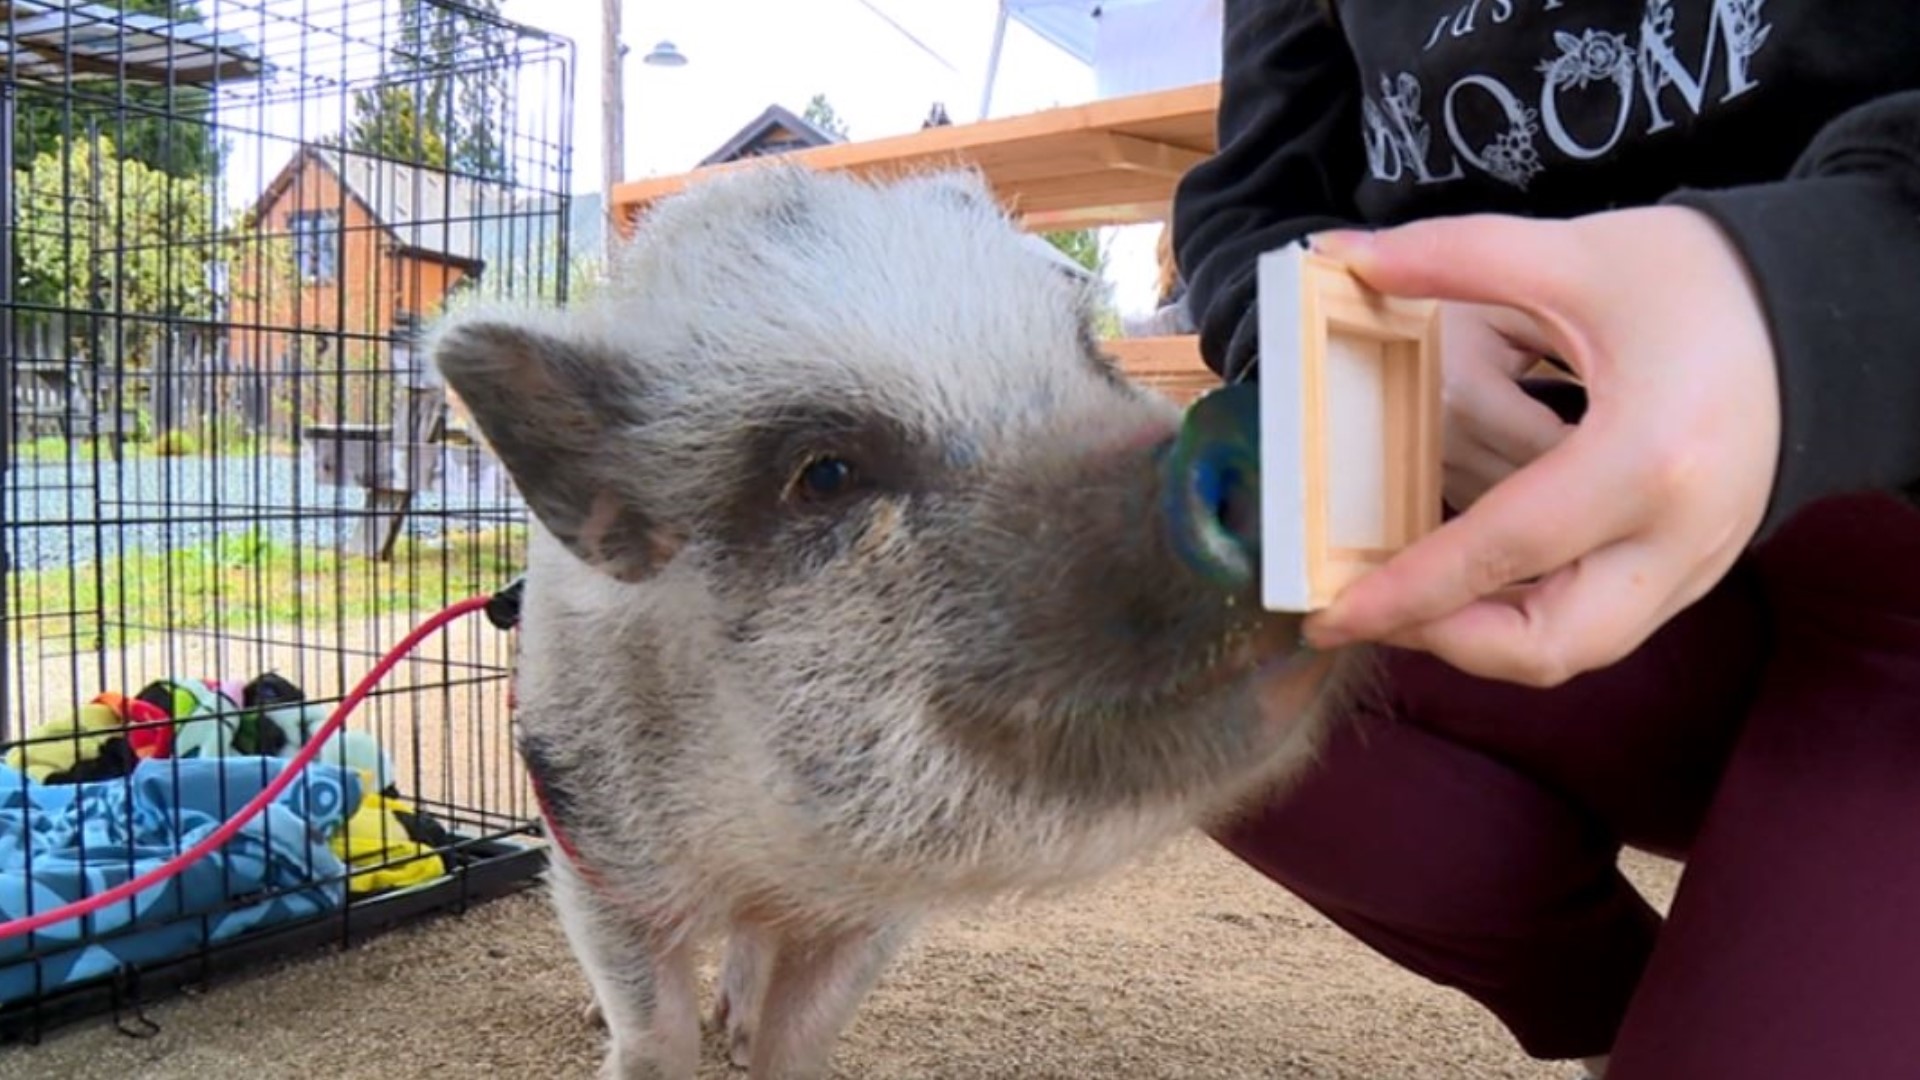 Almost everyone wants a little "mouse-terpiece" from Mouse the Painting Pig. #k5evening